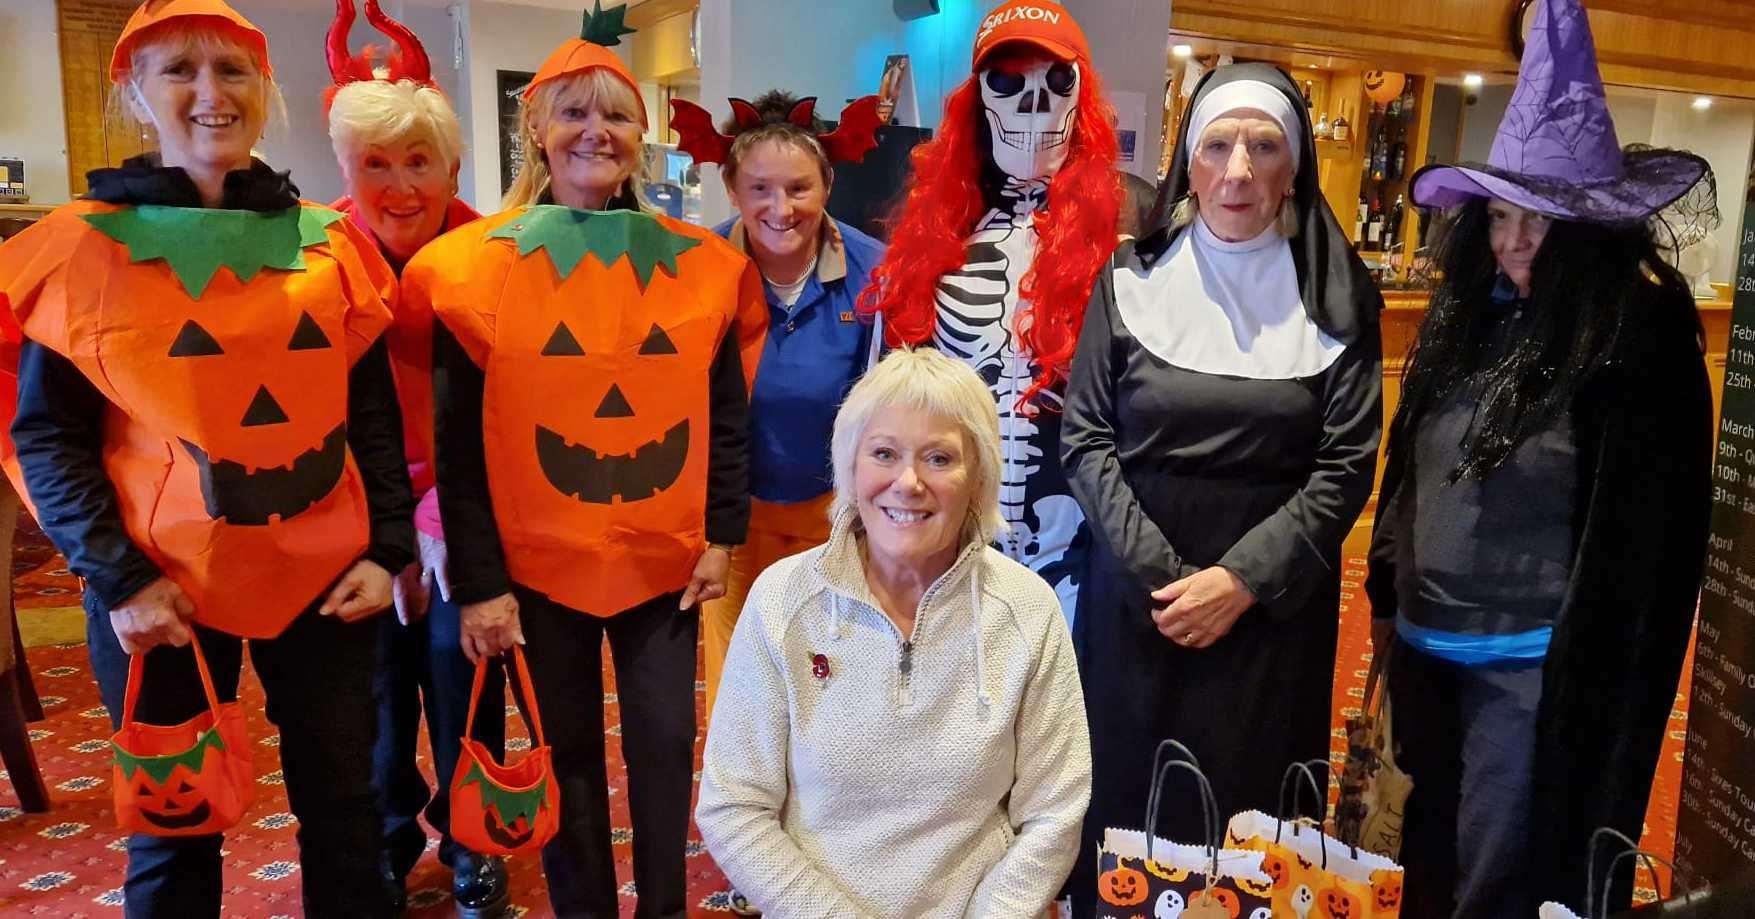 Theford Golf Club's Ladies' section held their annual Halloween Greensomes event Picture: Gill Welham